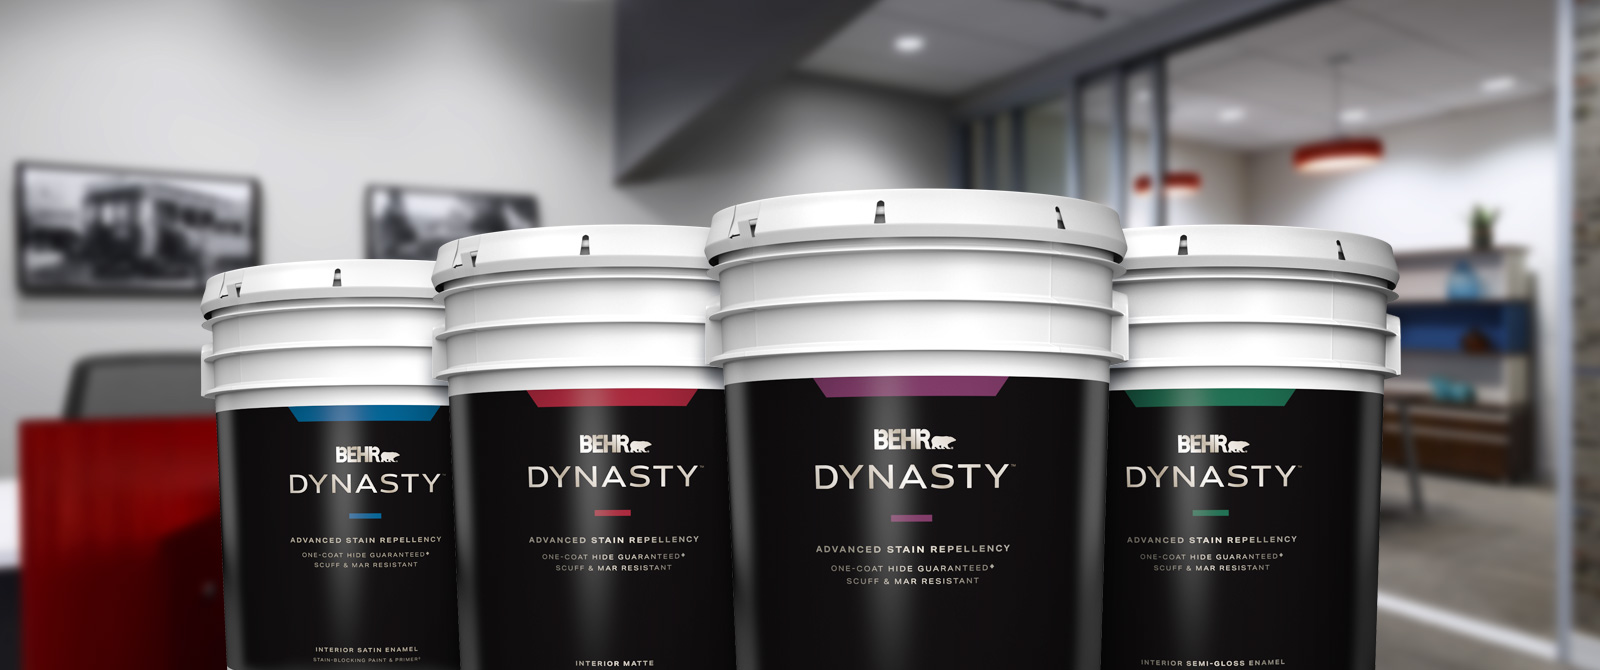 BEHR Dynasty Product Line in 5 gallons